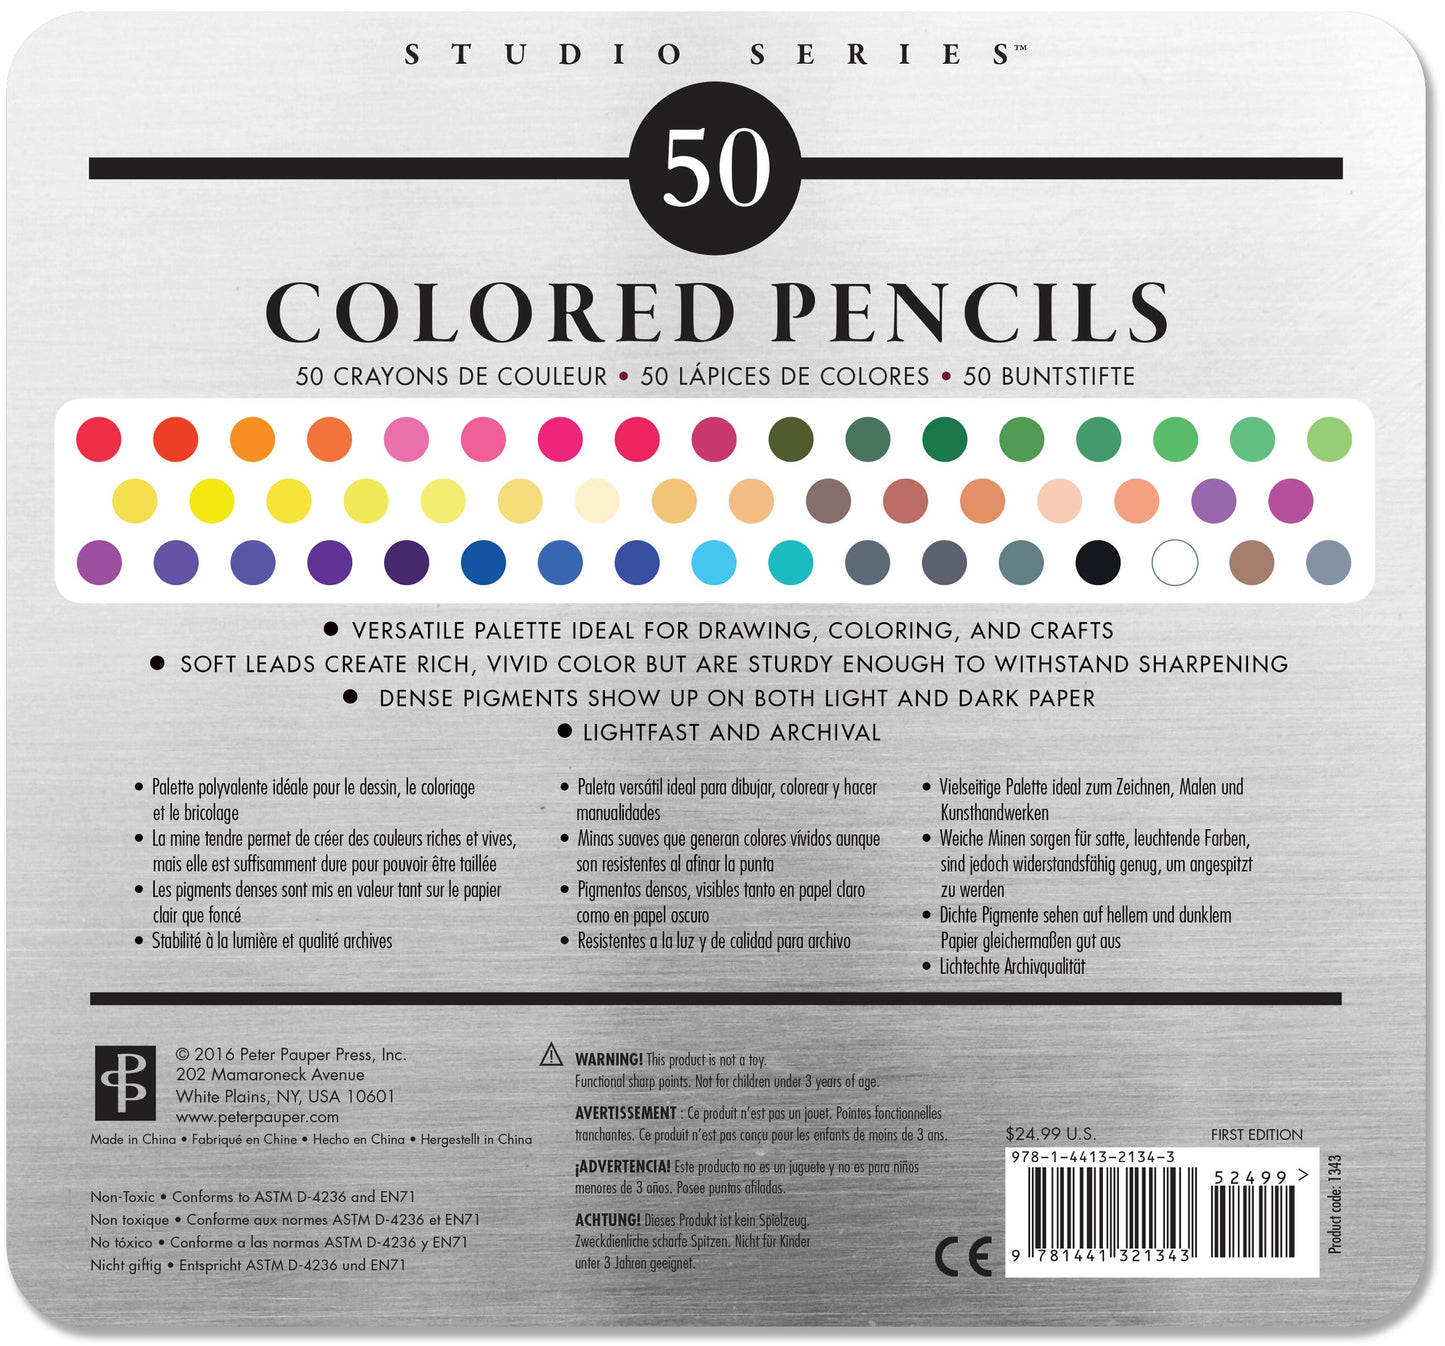 studio series deluxe colored pencil set of 50 peter pauper press creativity vibrant colored pencils premium hues pigments luminous color saturation soft leads smooth blending shading colorists dabblers artists art tin stationary pencil drawing